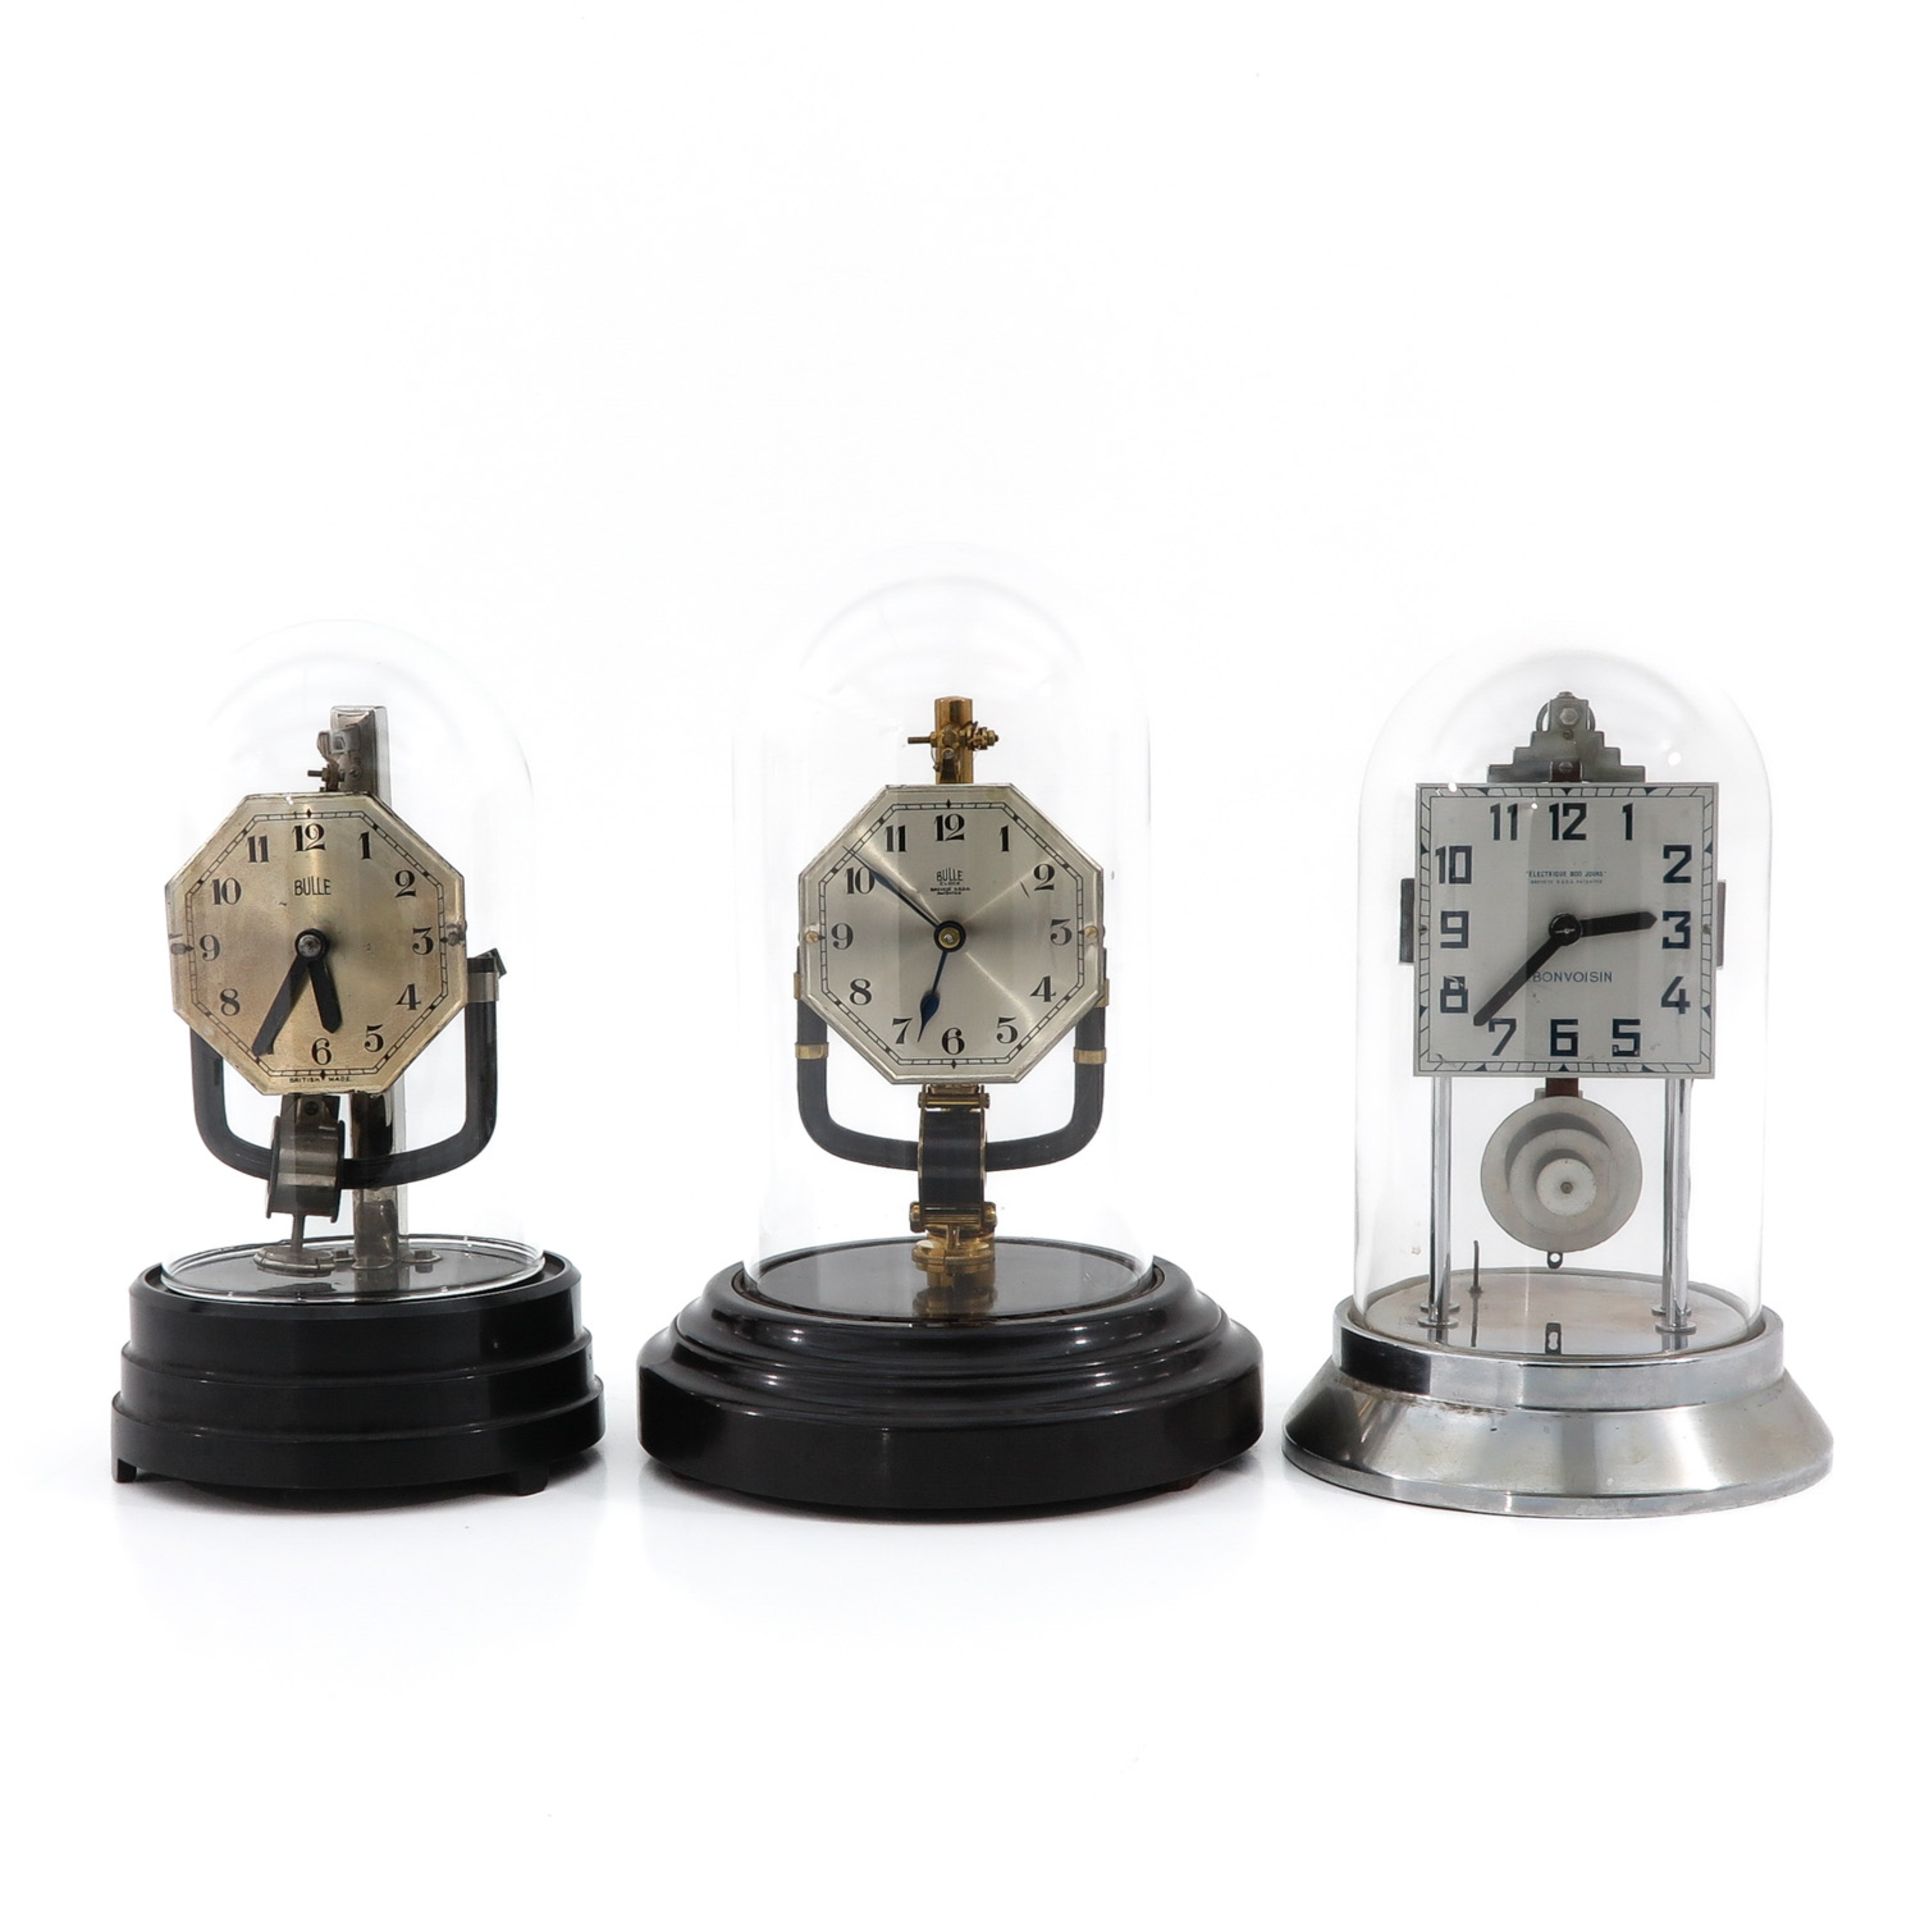 A Collection of 3 Electric Clocks